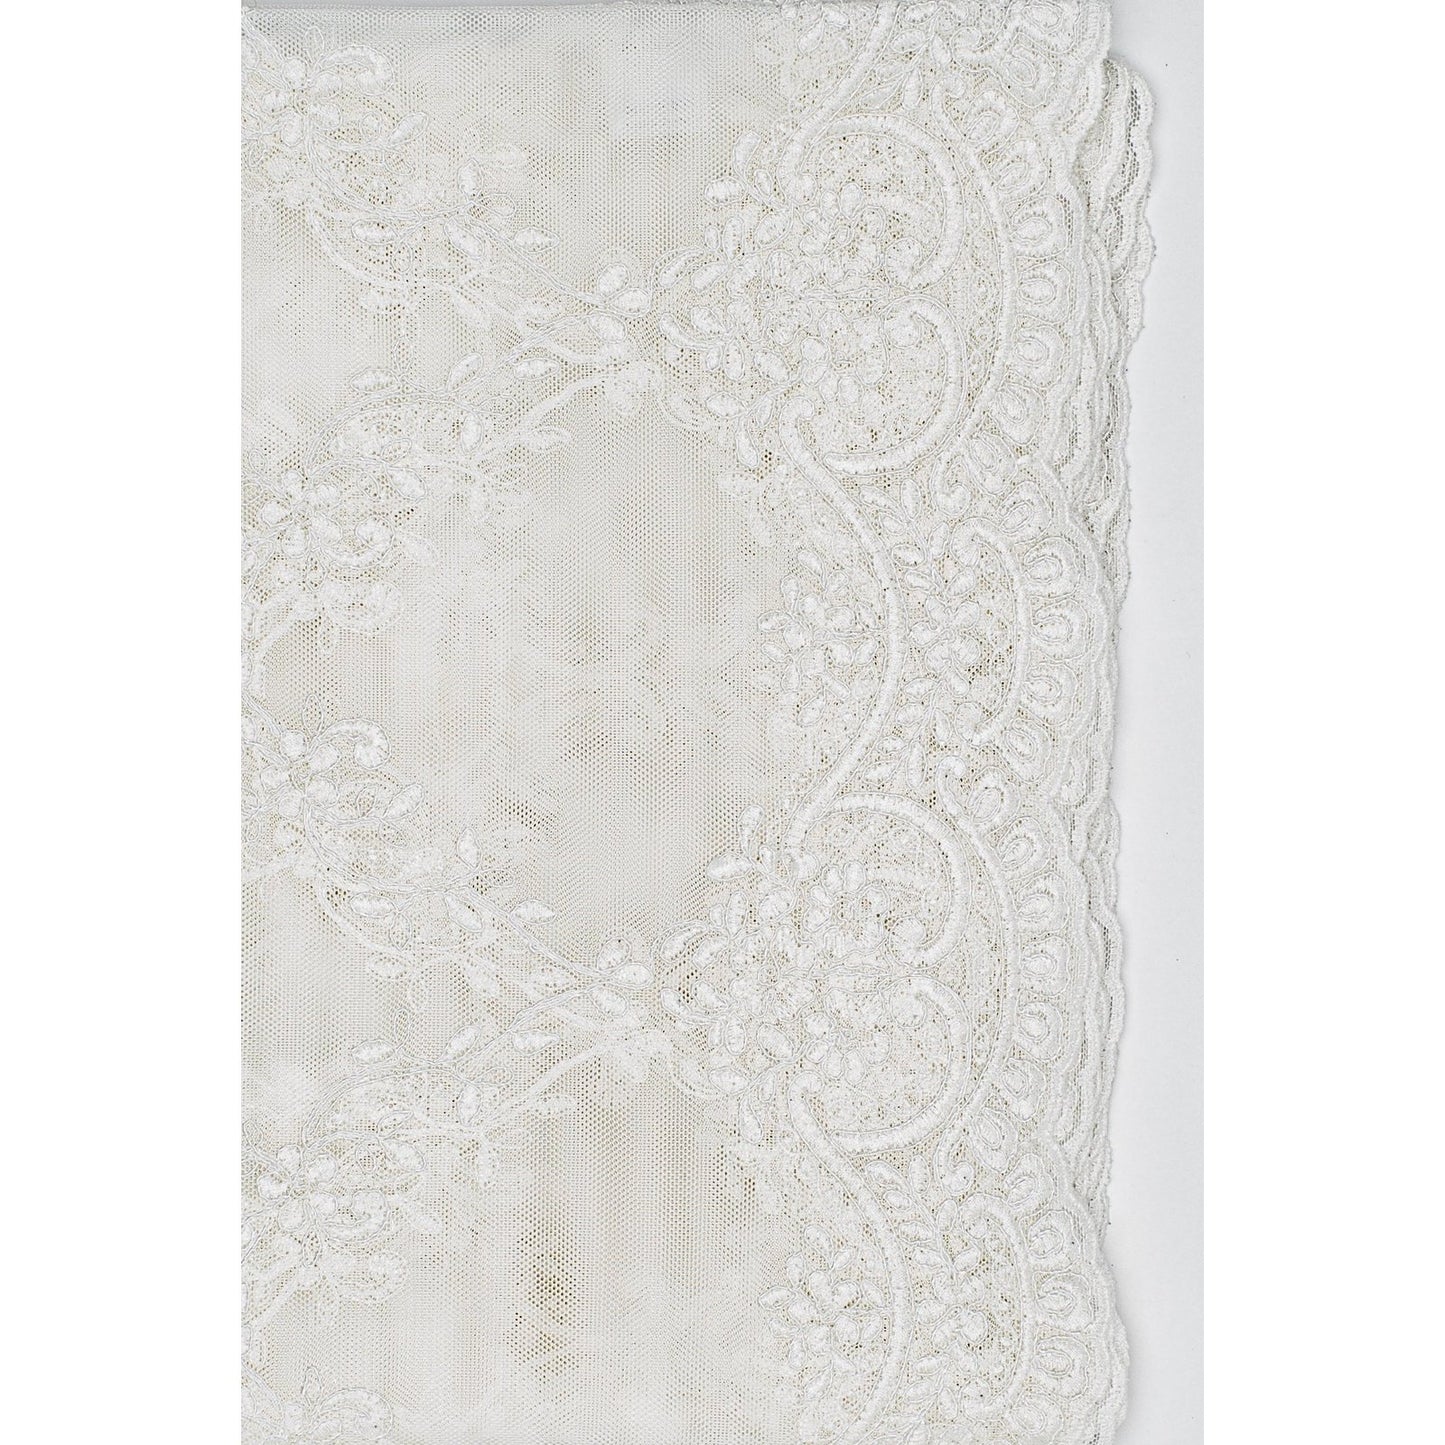 This luxurious embroidered lace tablecloth will transform your table in an instant! The beautiful and delicate embroidery make this tablecloth stand out. Despite its delicate look, this tablecloth can be machine washed without problems.  A perfect product for the host who only wants the best for her/his guests!